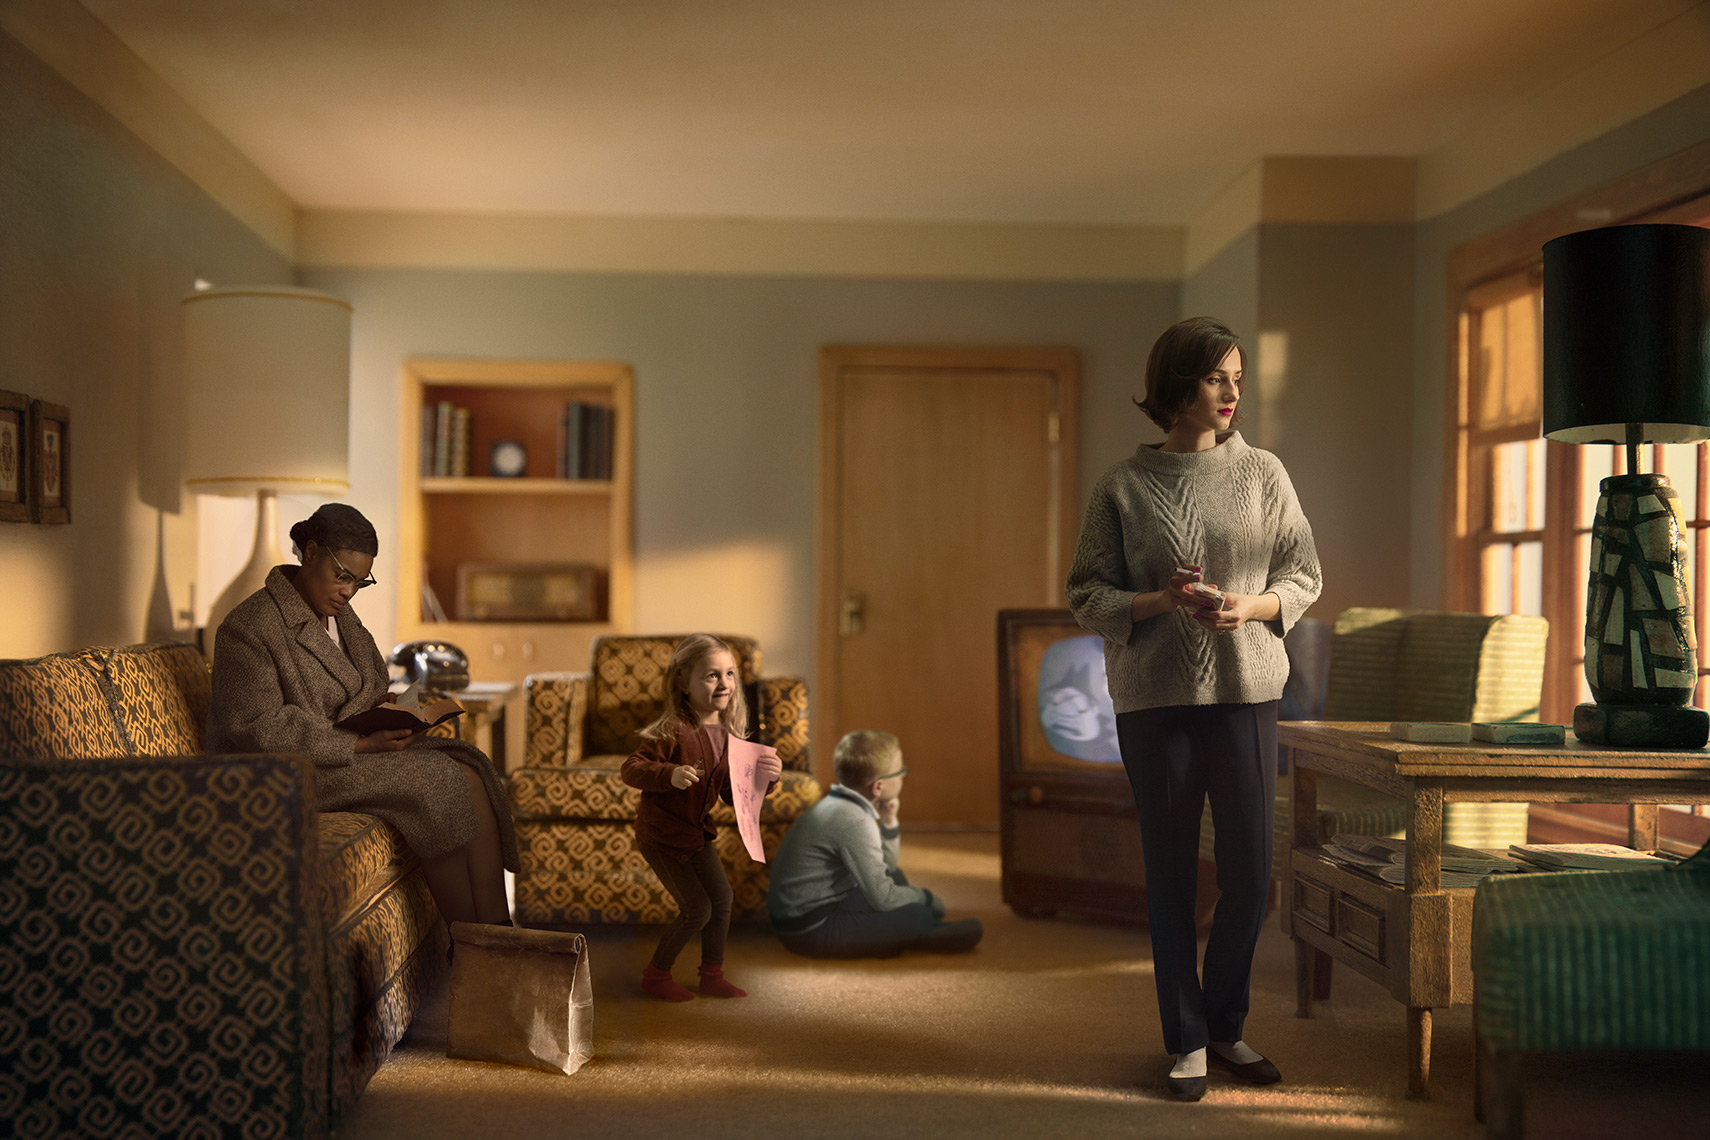 Late afternoon 960s suburban living room: African-American housekeeper sits on the couch, boy watches TV, girl approaches mother lost in thought who gazes out the picture window